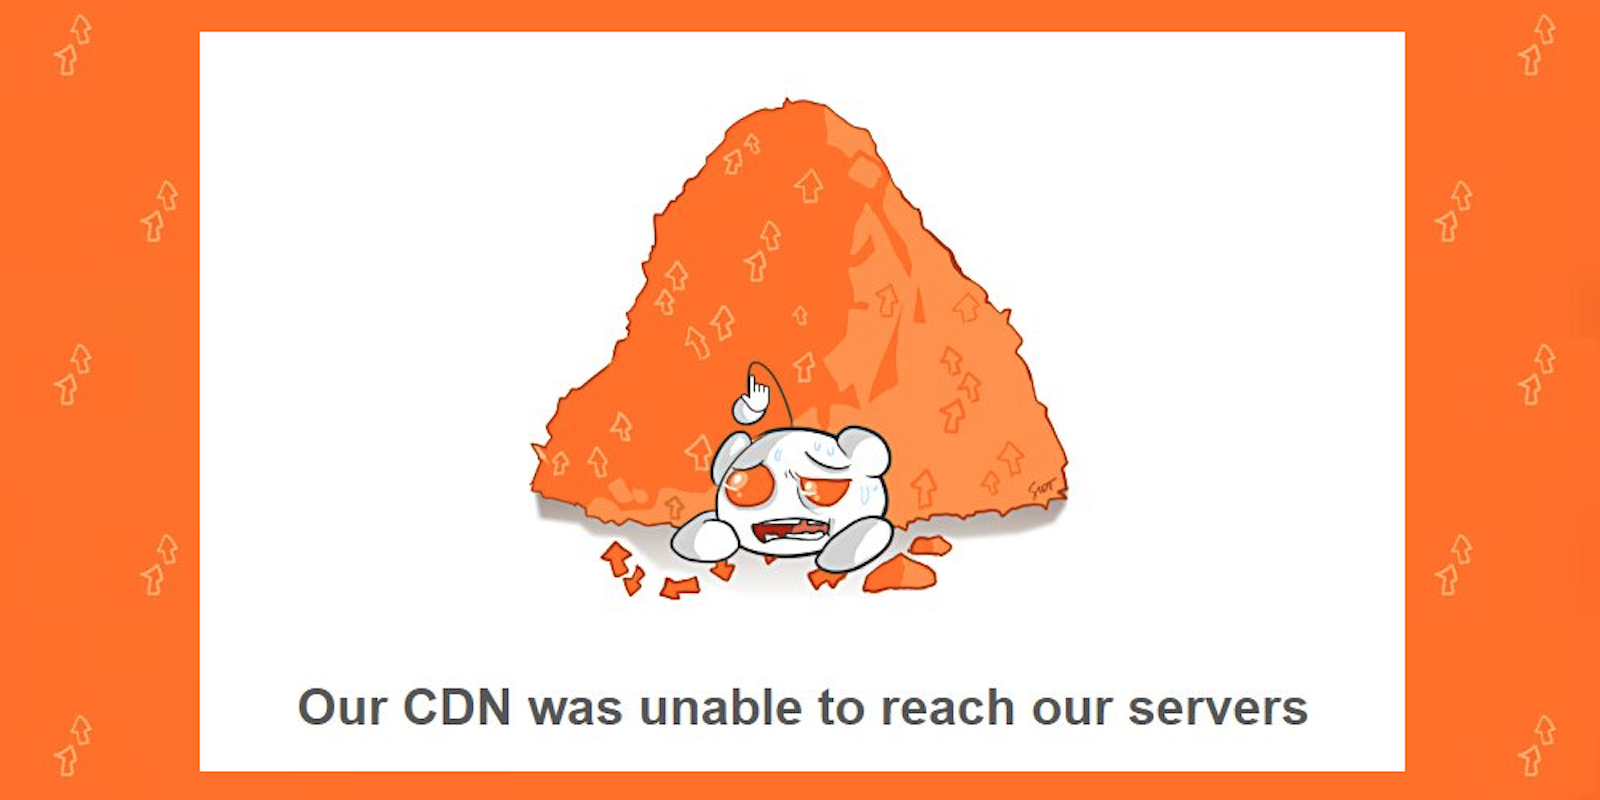 Reddit outage